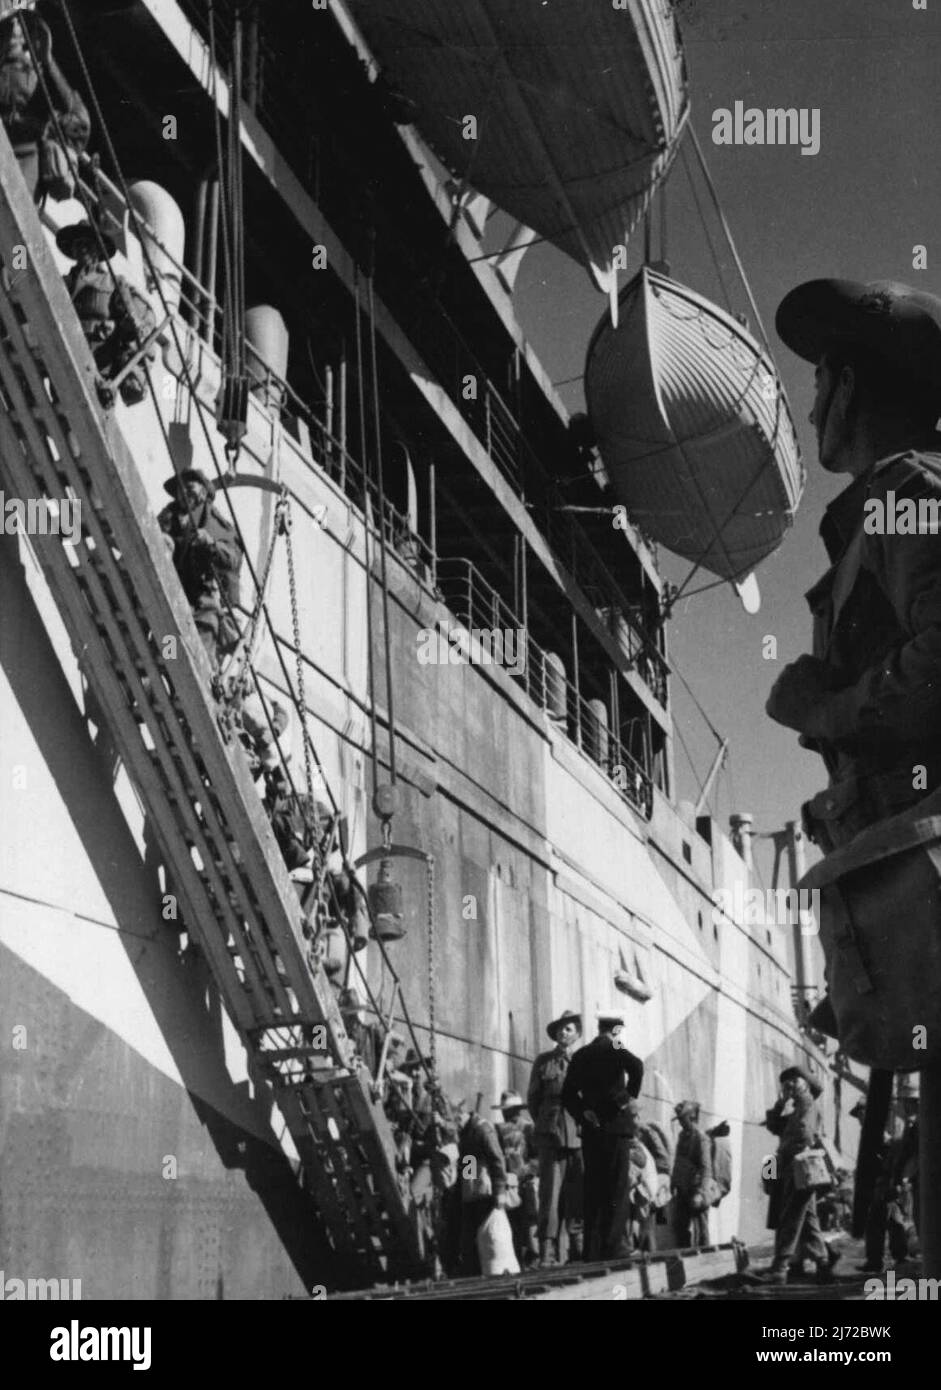 A.I.F. In Greece. May 7, 1941. Stock Photo